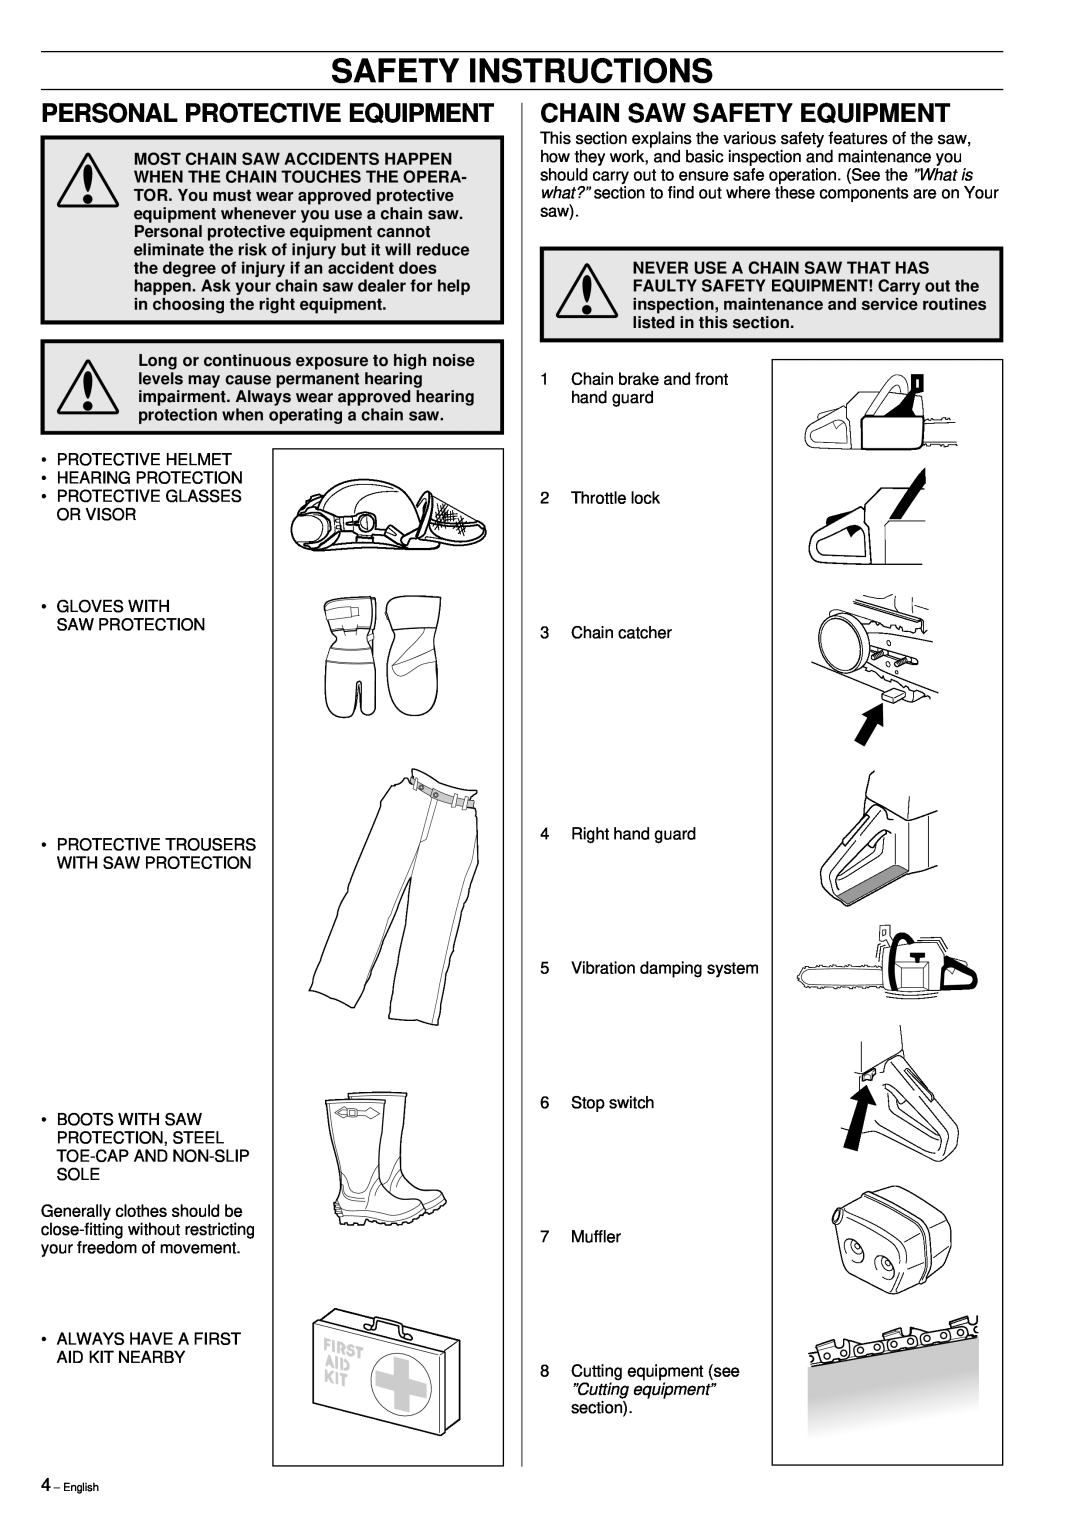 Husqvarna 61, 268, 272XP manual Safety Instructions, Personal Protective Equipment, Chain Saw Safety Equipment 